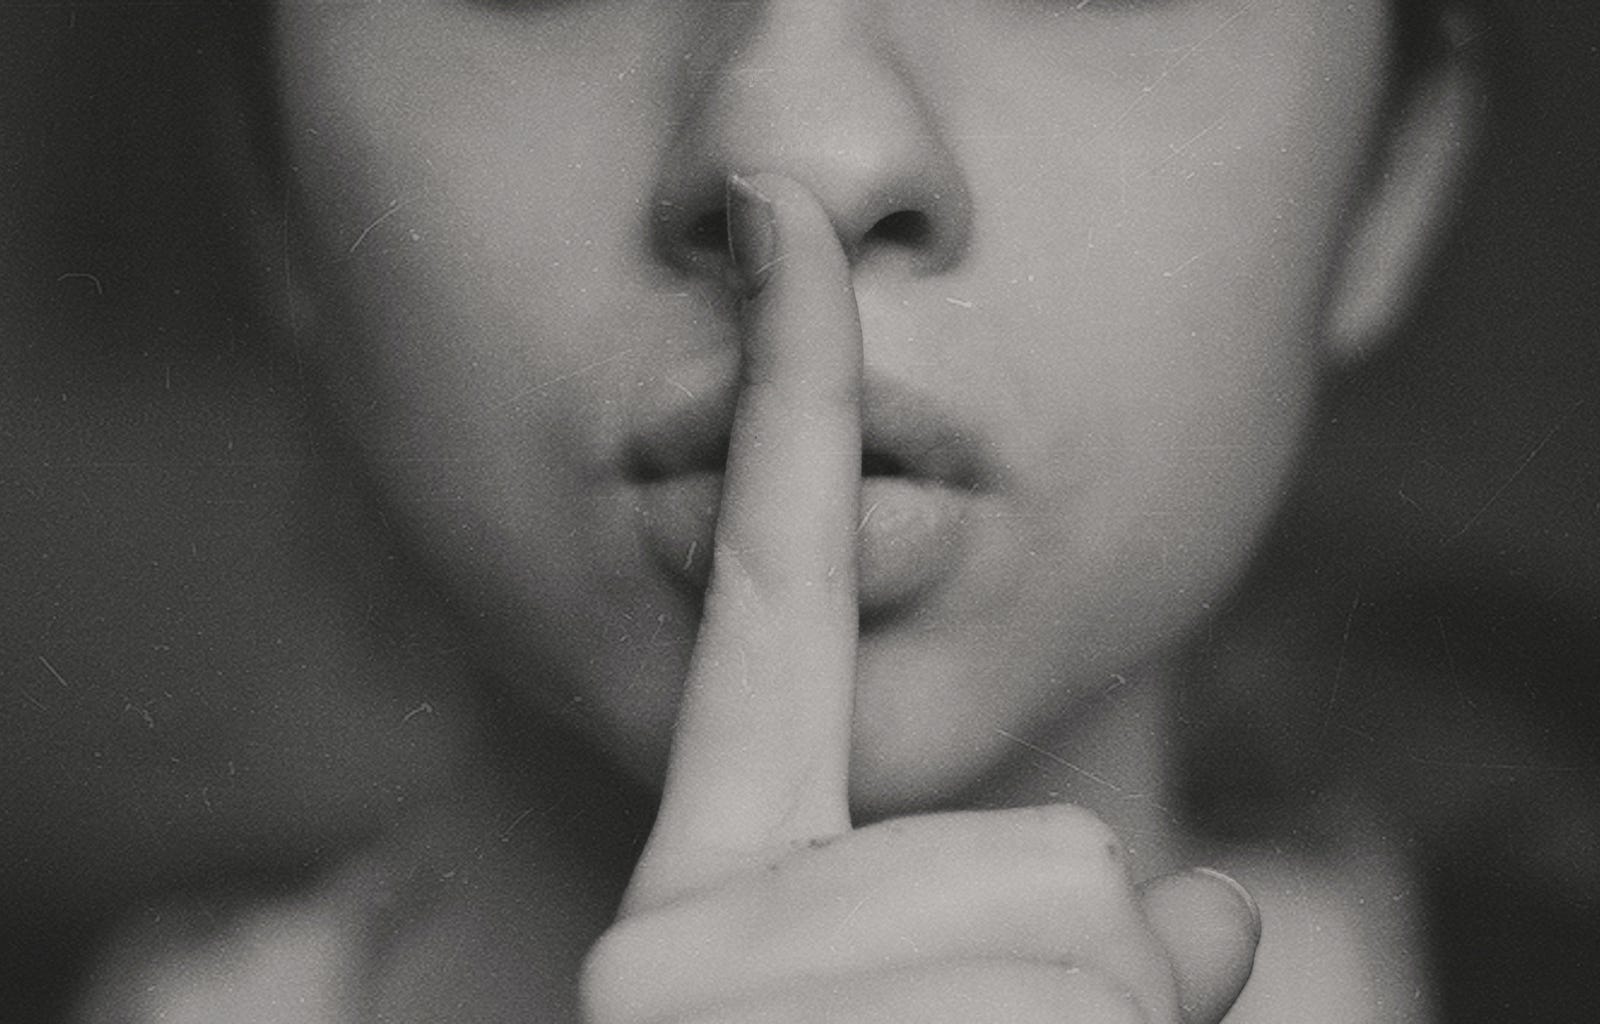 A black and white image of a person putting their second digit to their mouth, signaling “Shh.” Silent walking might be worth exploring if you find solace in quiet reflection, yearn for a respite from the daily cacophony, or seek a novel way to connect with others.